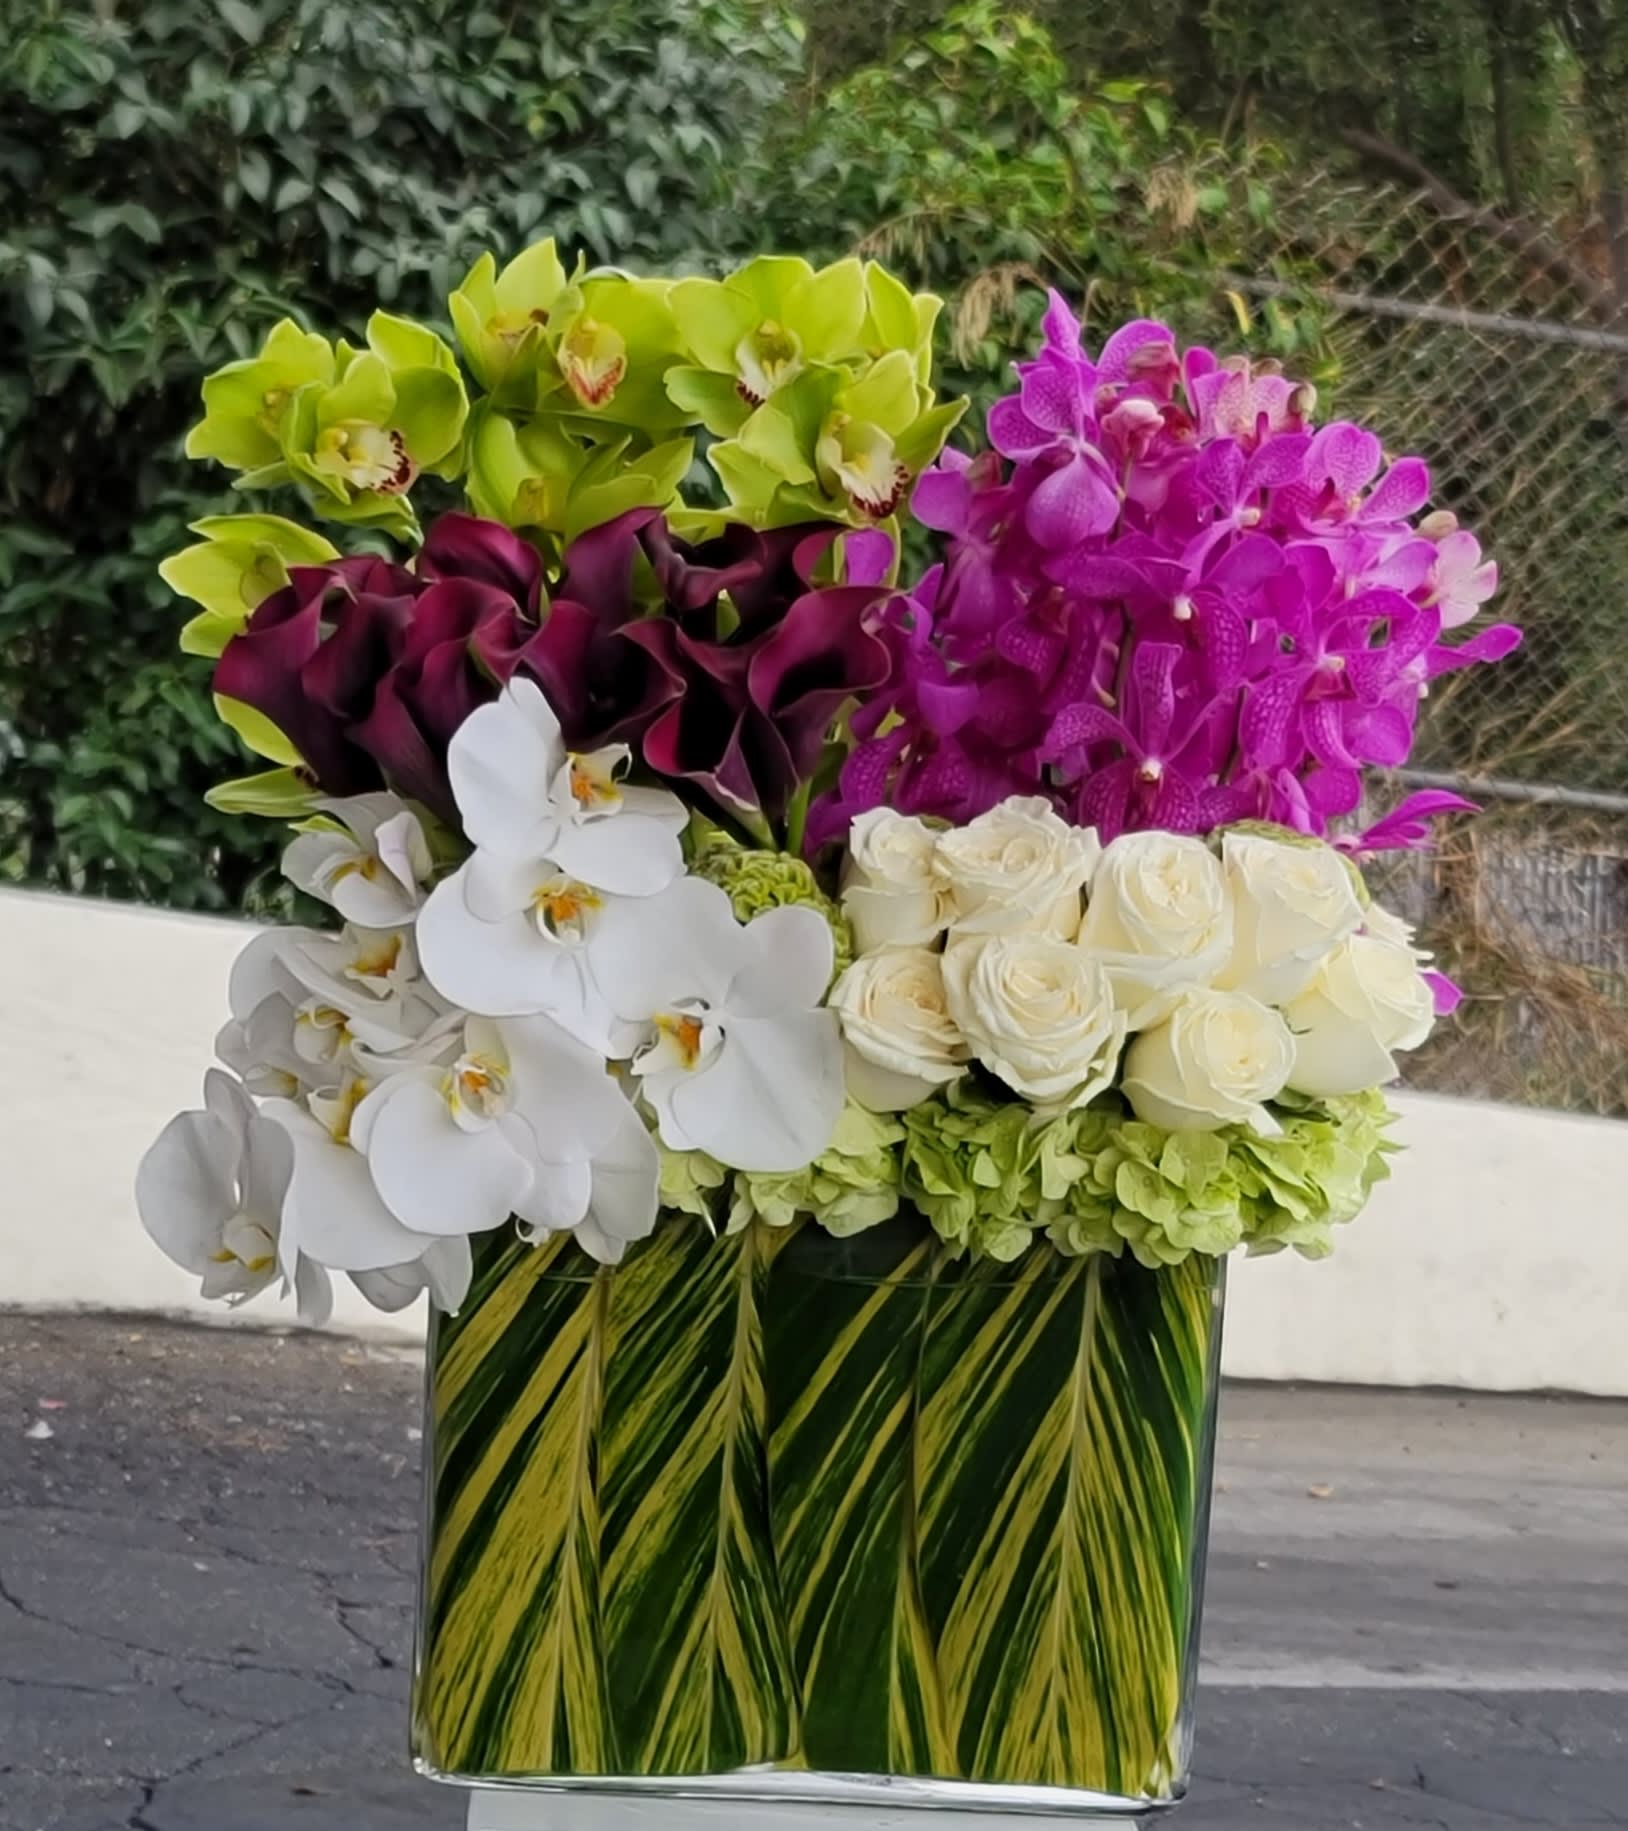 Westwood - Unleash a symphony of color and elegance with this stunning bouquet from Dave's Flowers, your Los Angeles oasis of floral artistry. Imagine velvety purple Mokara orchids dancing with vibrant green hydrangeas, graceful green cymbidium orchids adding depth, and a touch of purity with white phalaenopsis orchids and classic white roses. This masterpiece, meticulously crafted by hand, elevates any occasion with a touch of timeless LA sophistication.  More Than Just Blooms:  Fresh From Local Fields: We source every flower directly from trusted Los Angeles growers, ensuring vibrant color, intoxicating fragrance, and long-lasting freshness. Exquisitely Handcrafted: Our skilled Los Angeles florists, true artists of their craft, weave their magic, creating a harmonious masterpiece that surpasses expectations. Your Tailor-Made Floral Statement: Let us customize this beauty to your vision and budget, making it the perfect statement for birthdays, anniversaries, or simply adding a touch of LA elegance to your space. Blooming Convenience in LA:  Skip the traffic and let our blooms brighten your loved one's day. We offer convenient Los Angeles flower delivery, bringing the garden to their doorstep with same-day or scheduled options.